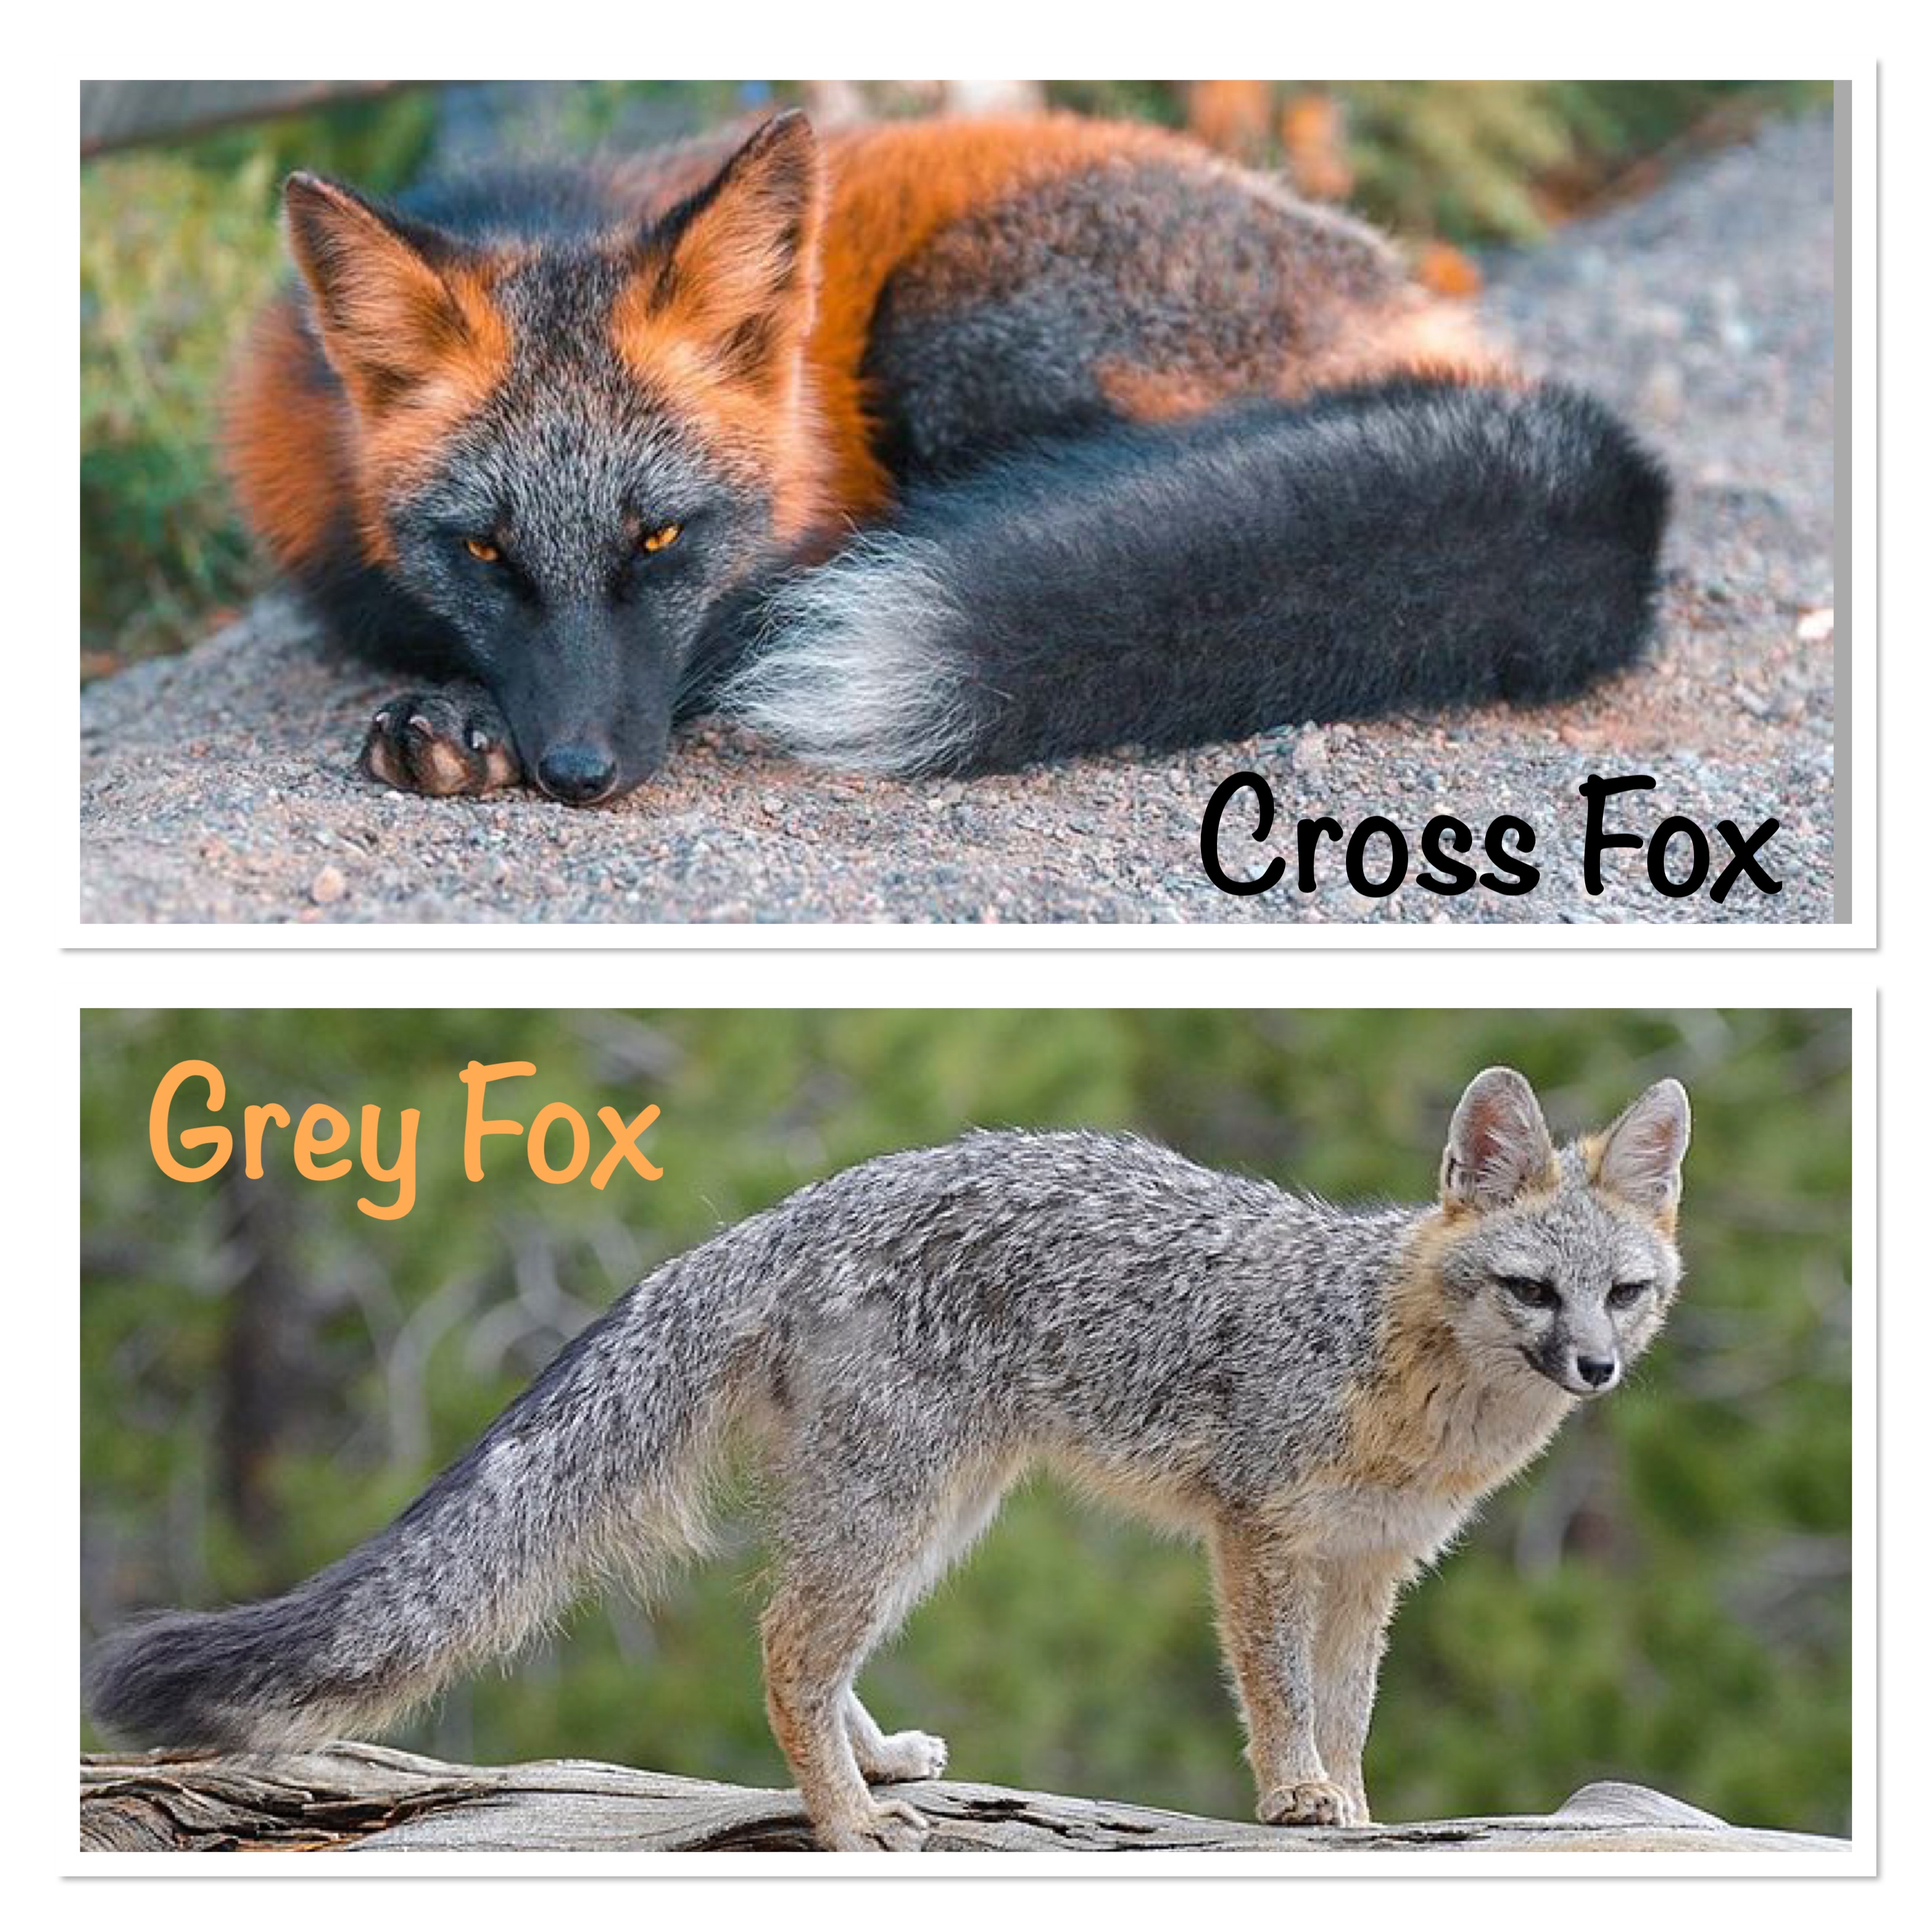 Cross Fox or Red Fox? How to Tell – For Fox Sake Wildlife Rescue